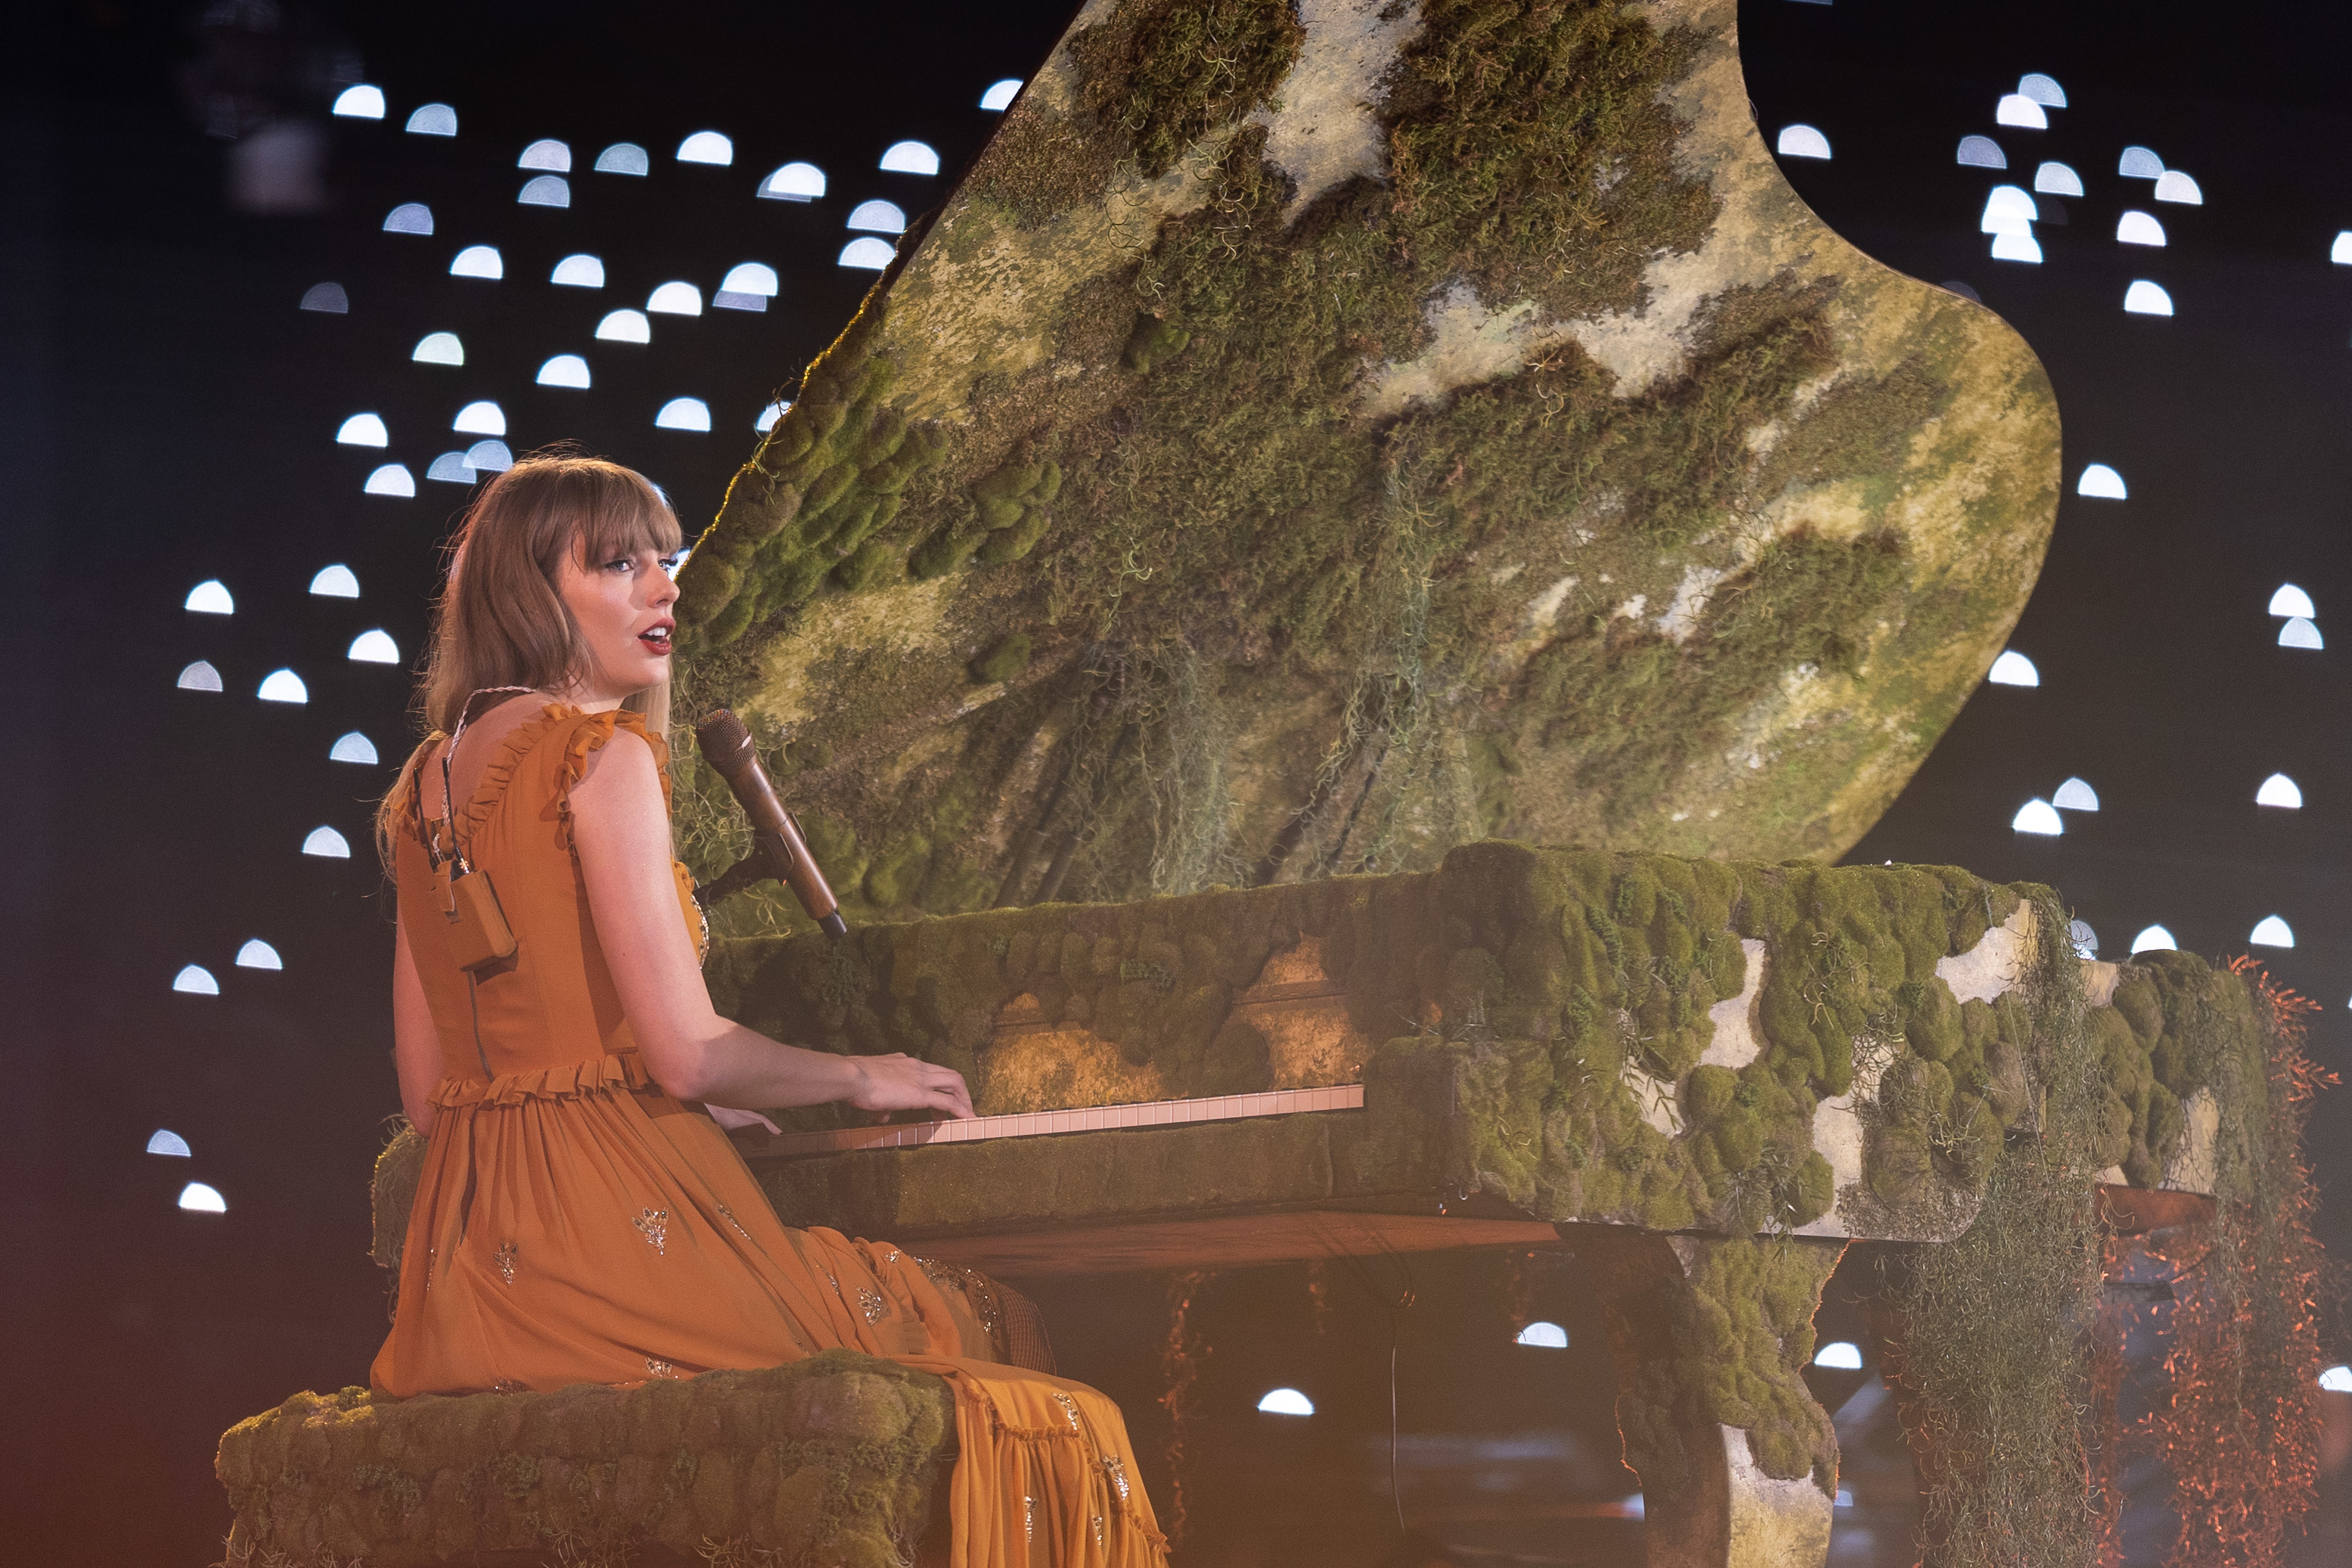 Taylor Swift onstage at a moss-covered piano